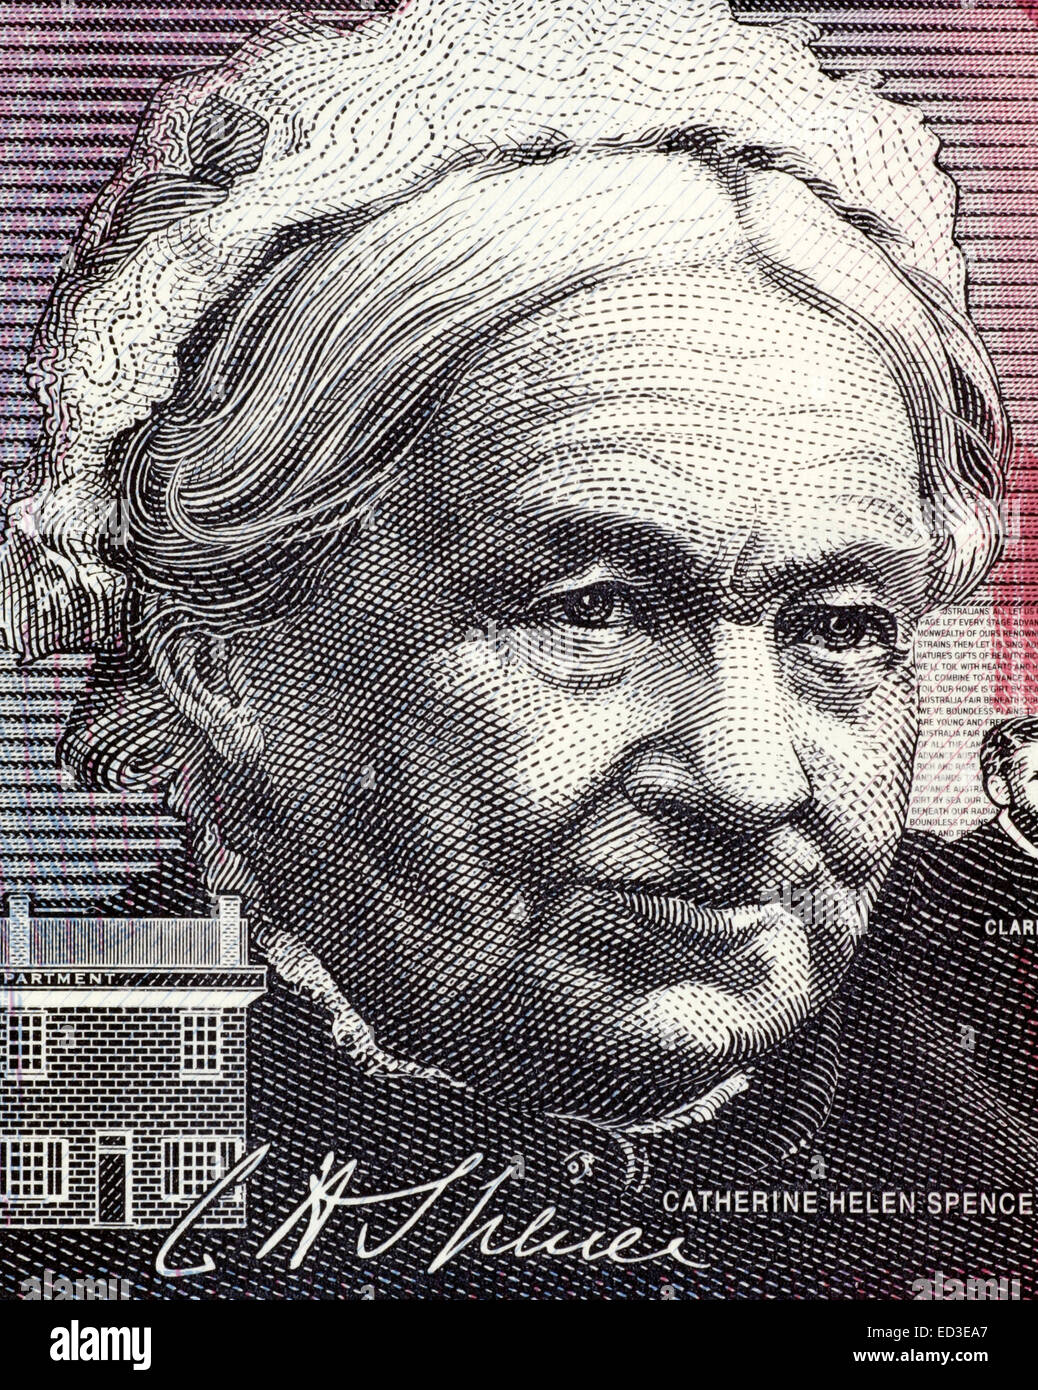 Catherine Helen Spence (1825-1910) on 5 Dollars 2001 banknote from Australia. Stock Photo